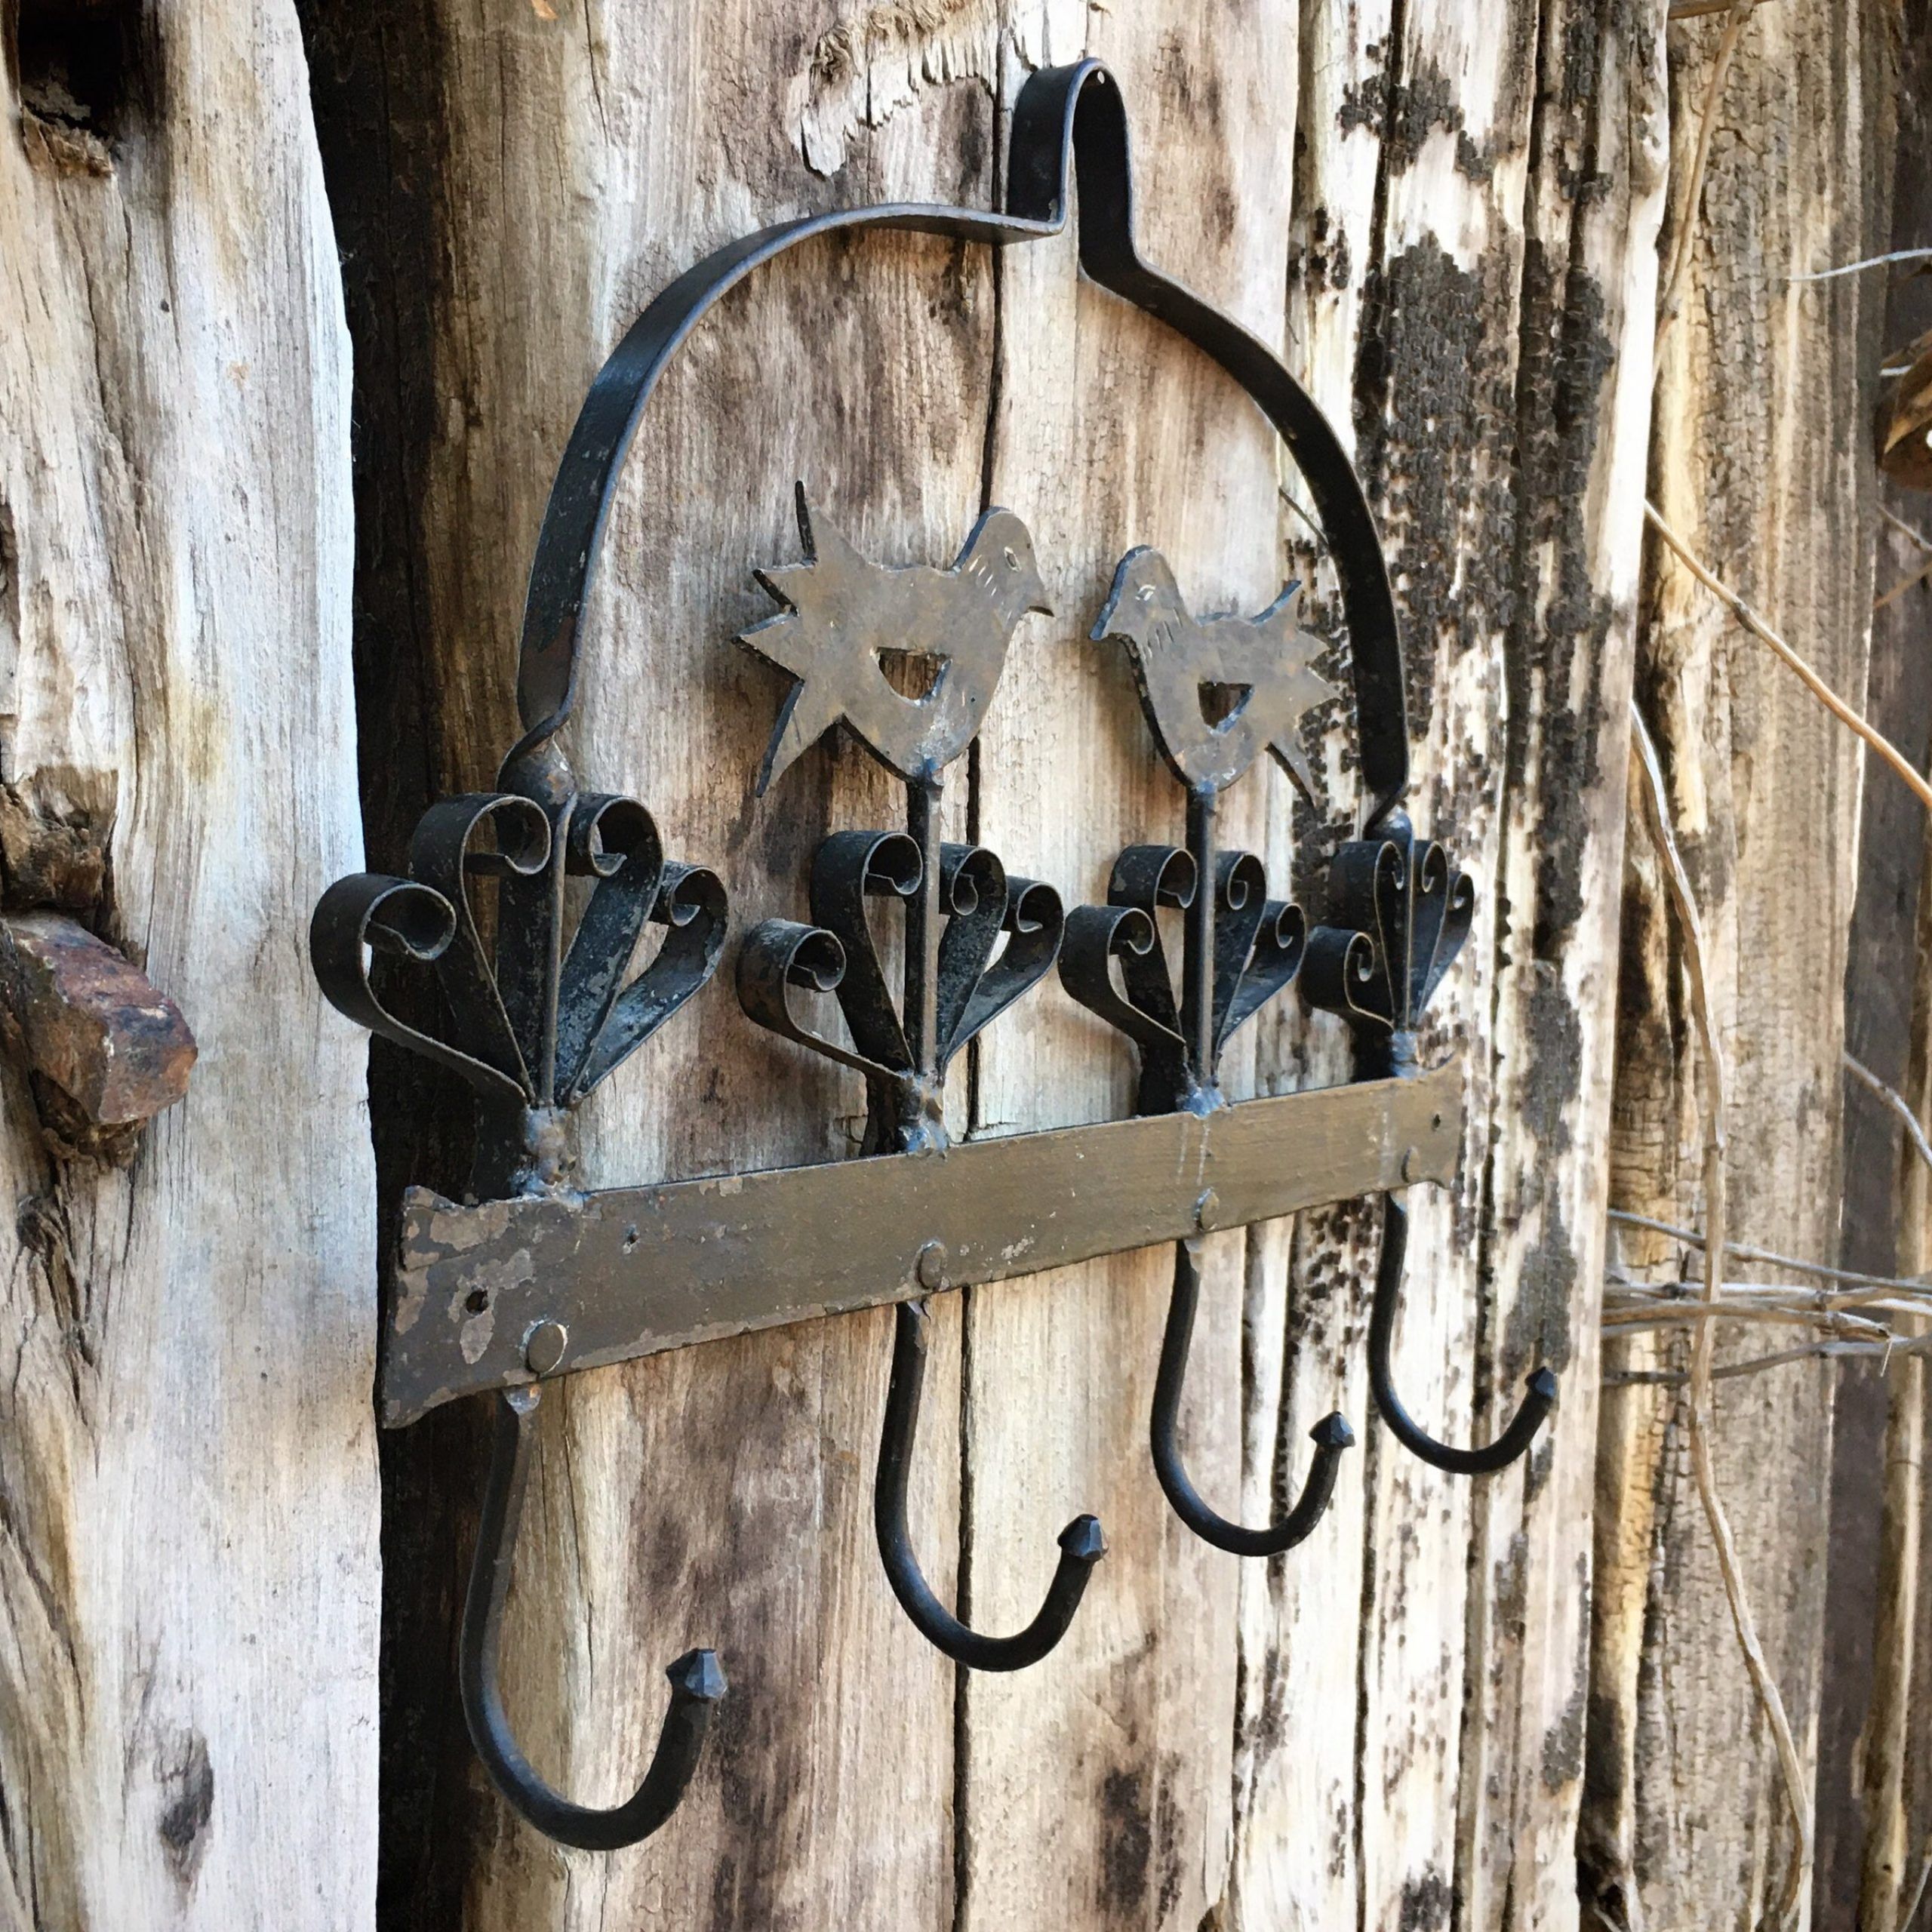 Hand Forged Iron Wall Art Within Well Known Forged Iron Bird Hook Wall Hanging For Towels Keys Lanyards, Library (View 2 of 15)